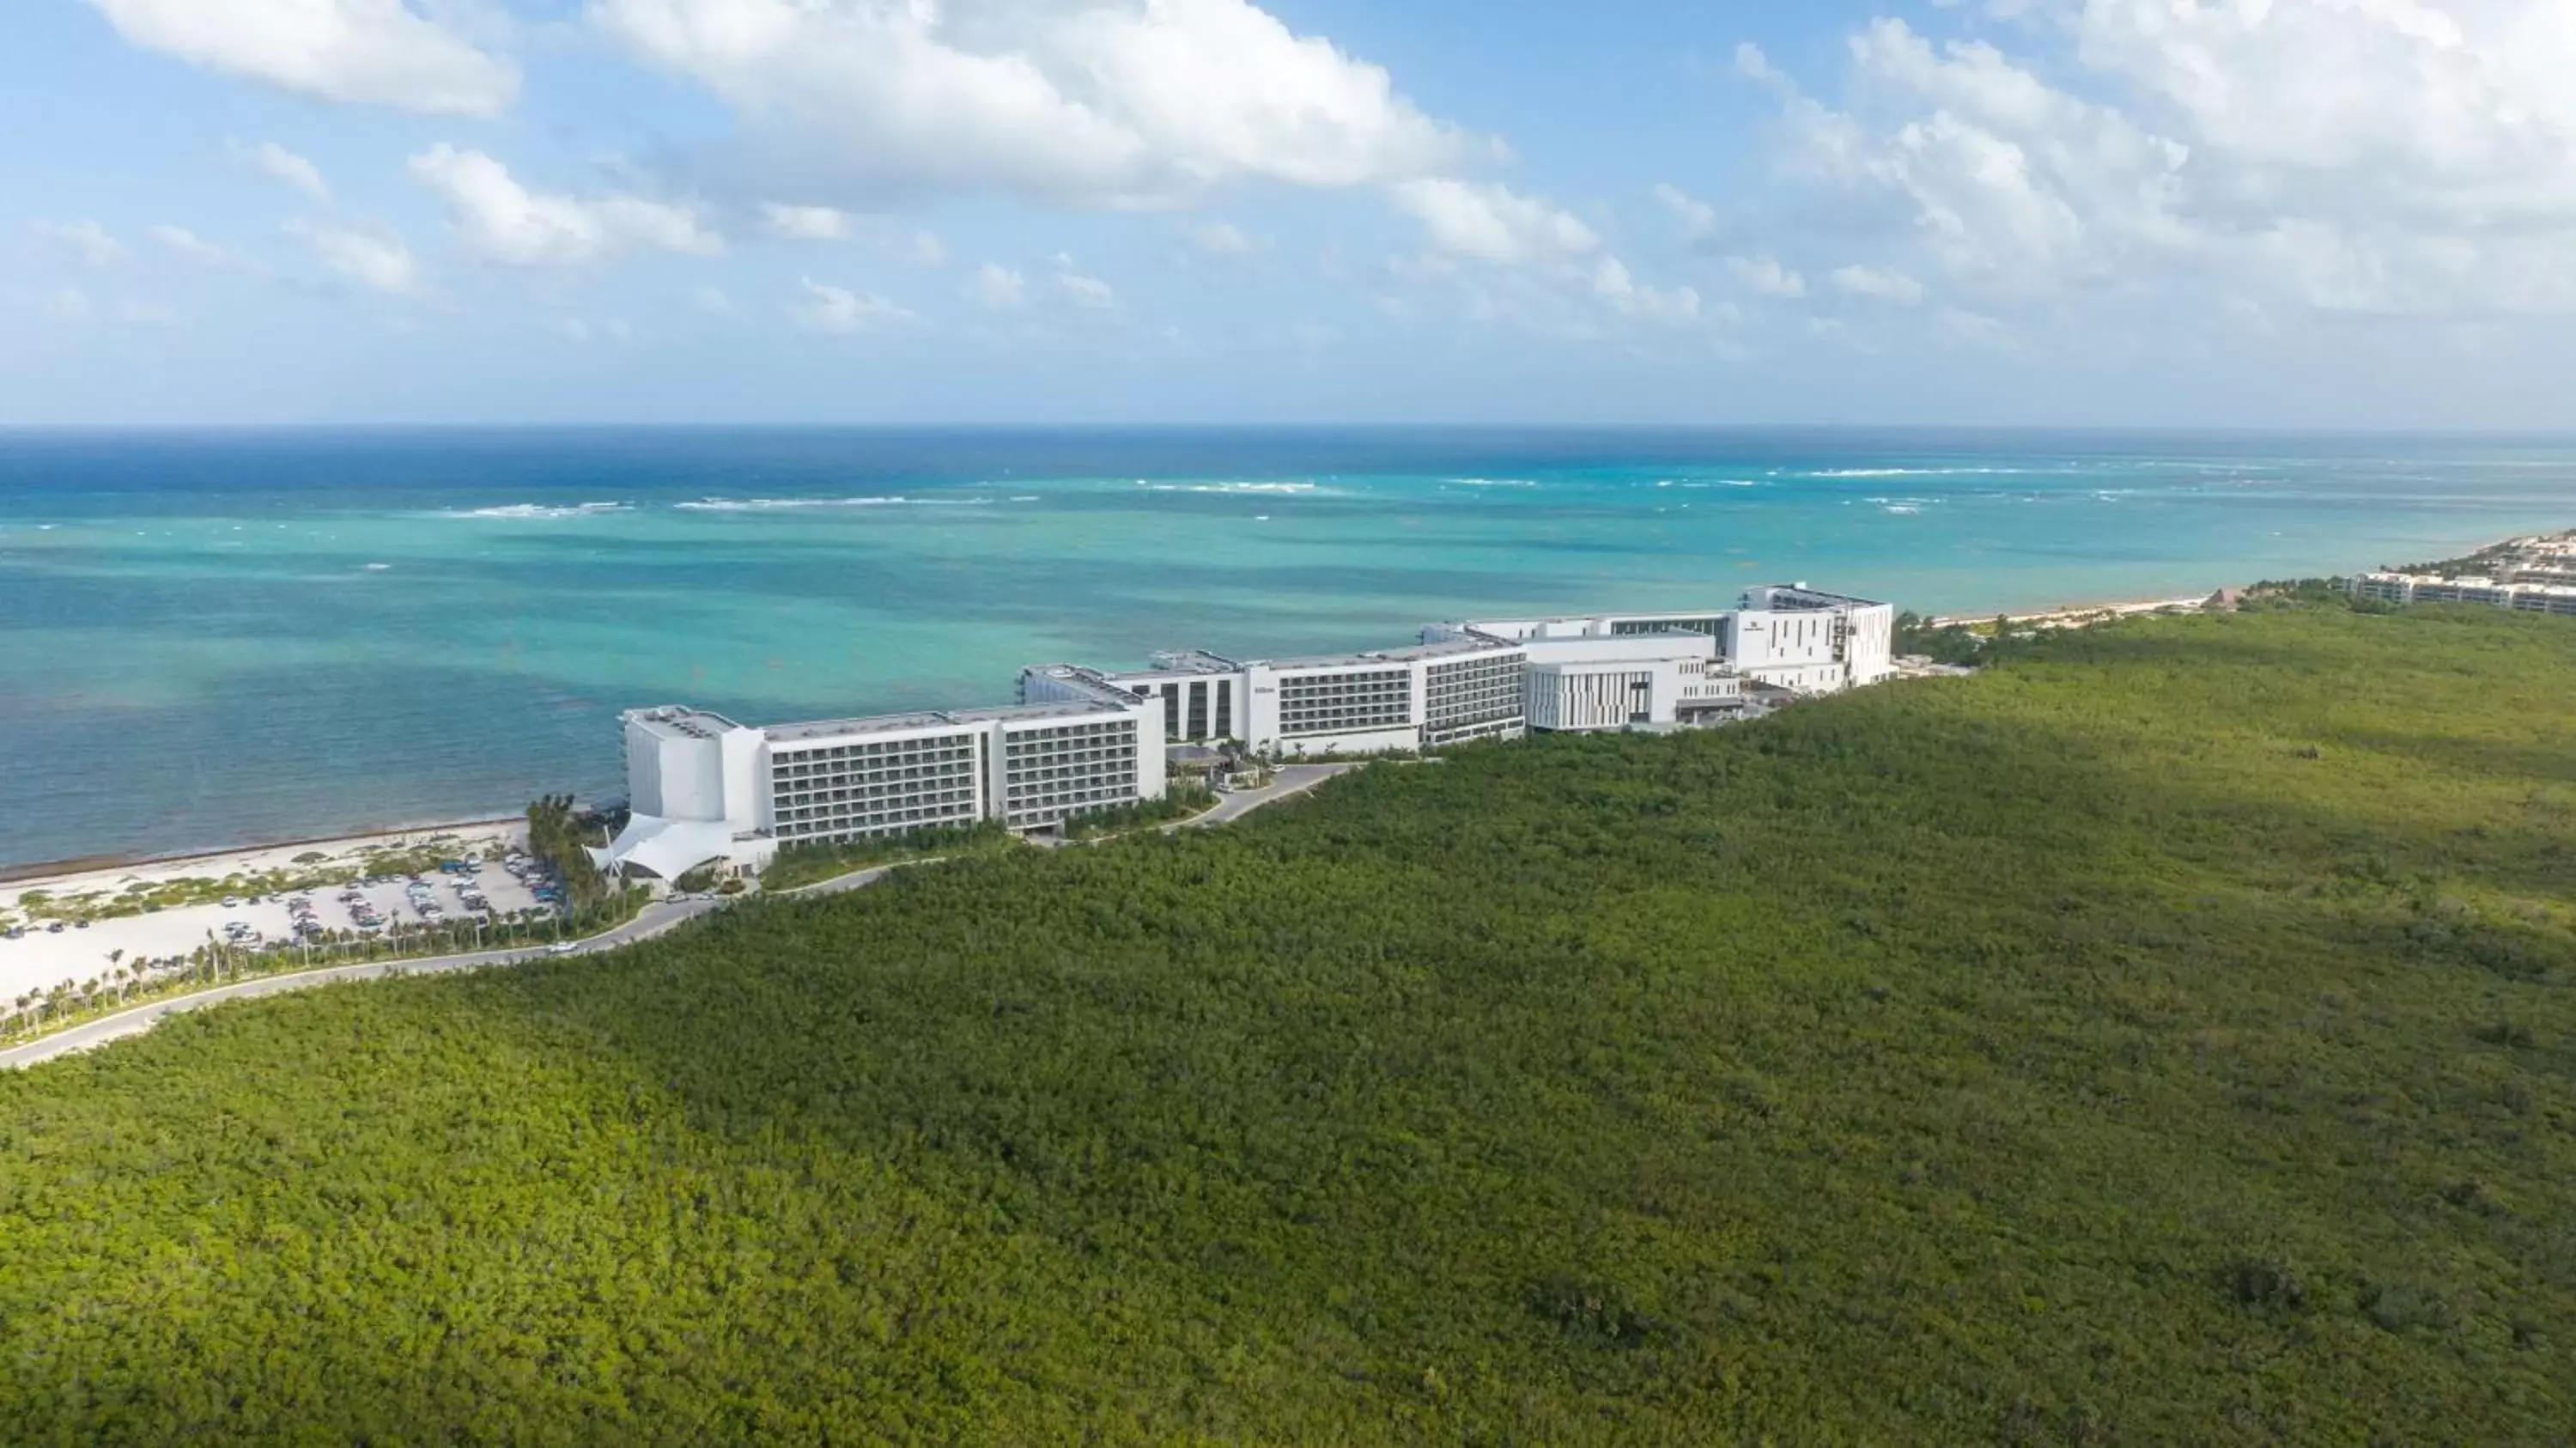 Property building, Bird's-eye View in Hilton Cancun, an All-Inclusive Resort